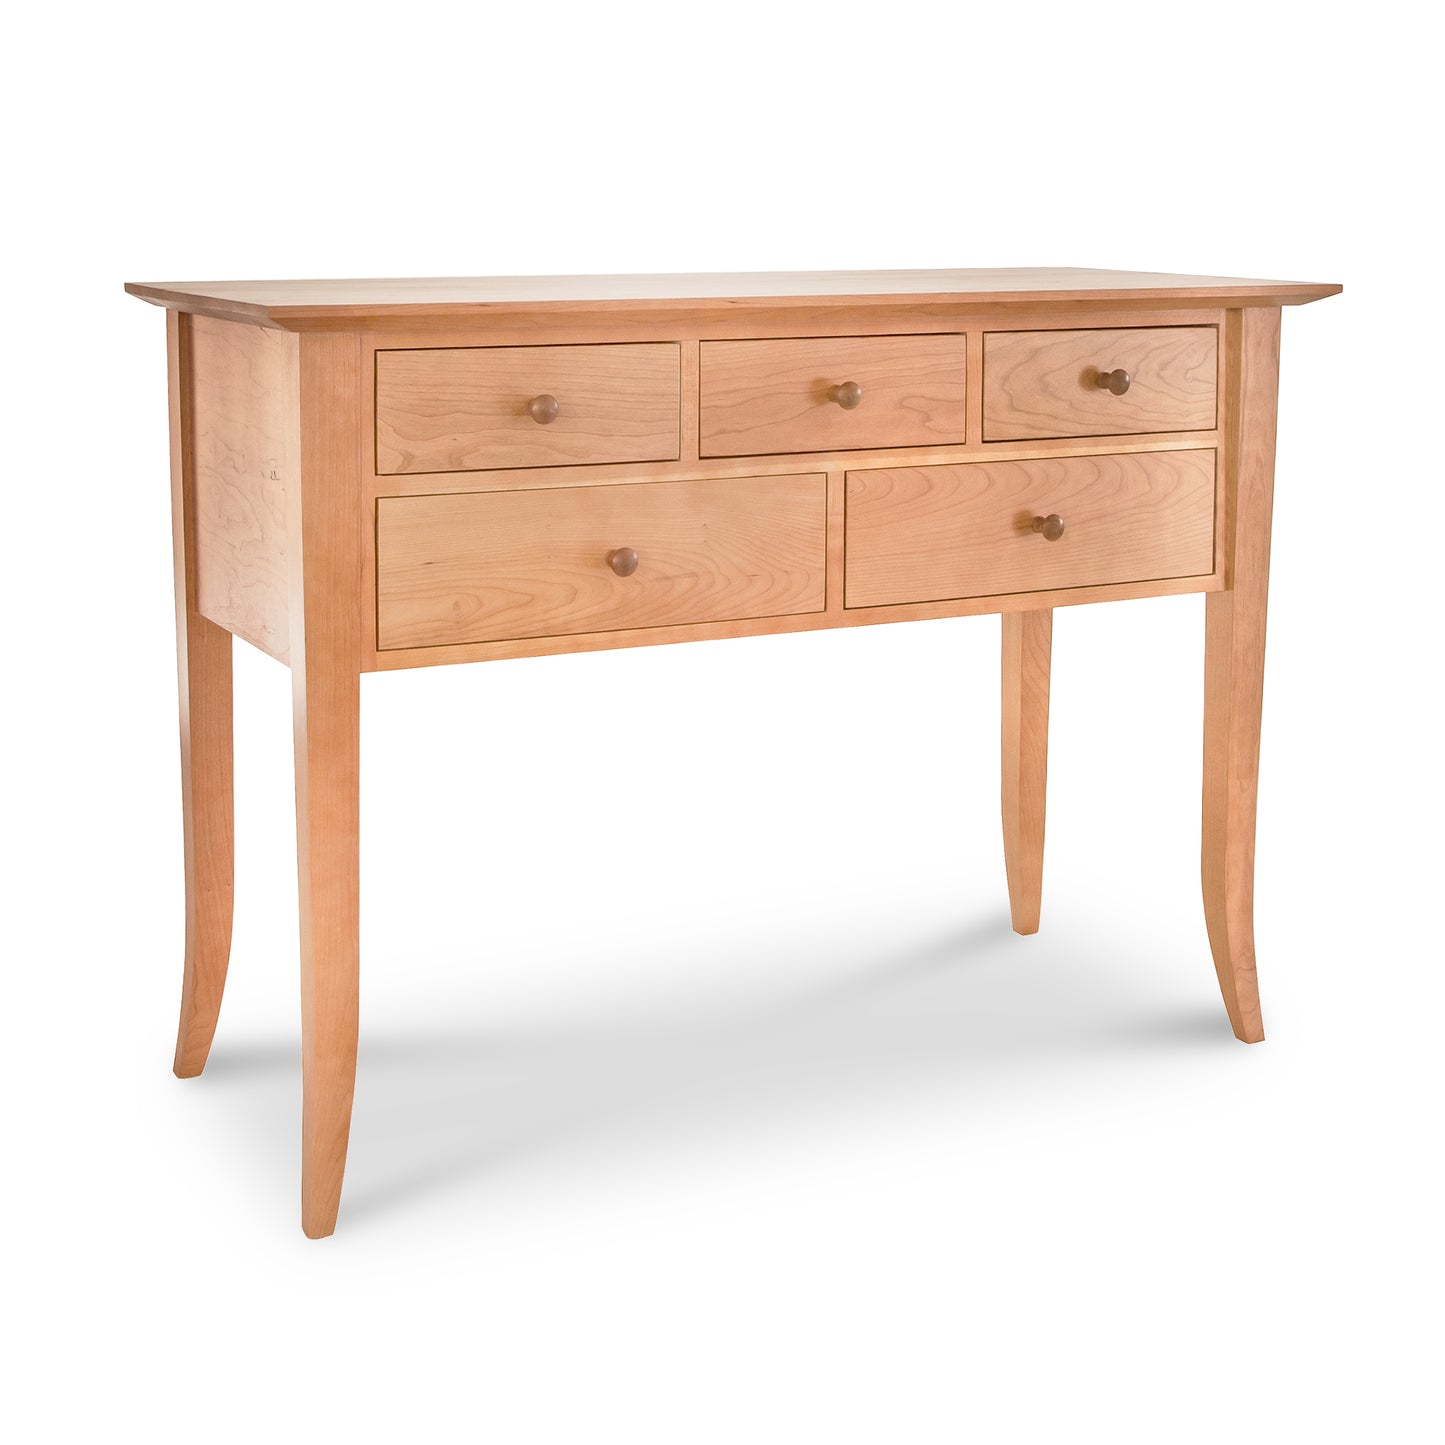 A Lyndon Furniture Classic Shaker Flare Leg 48" Hunt Board with three drawers, perfect for luxury dining room furniture.